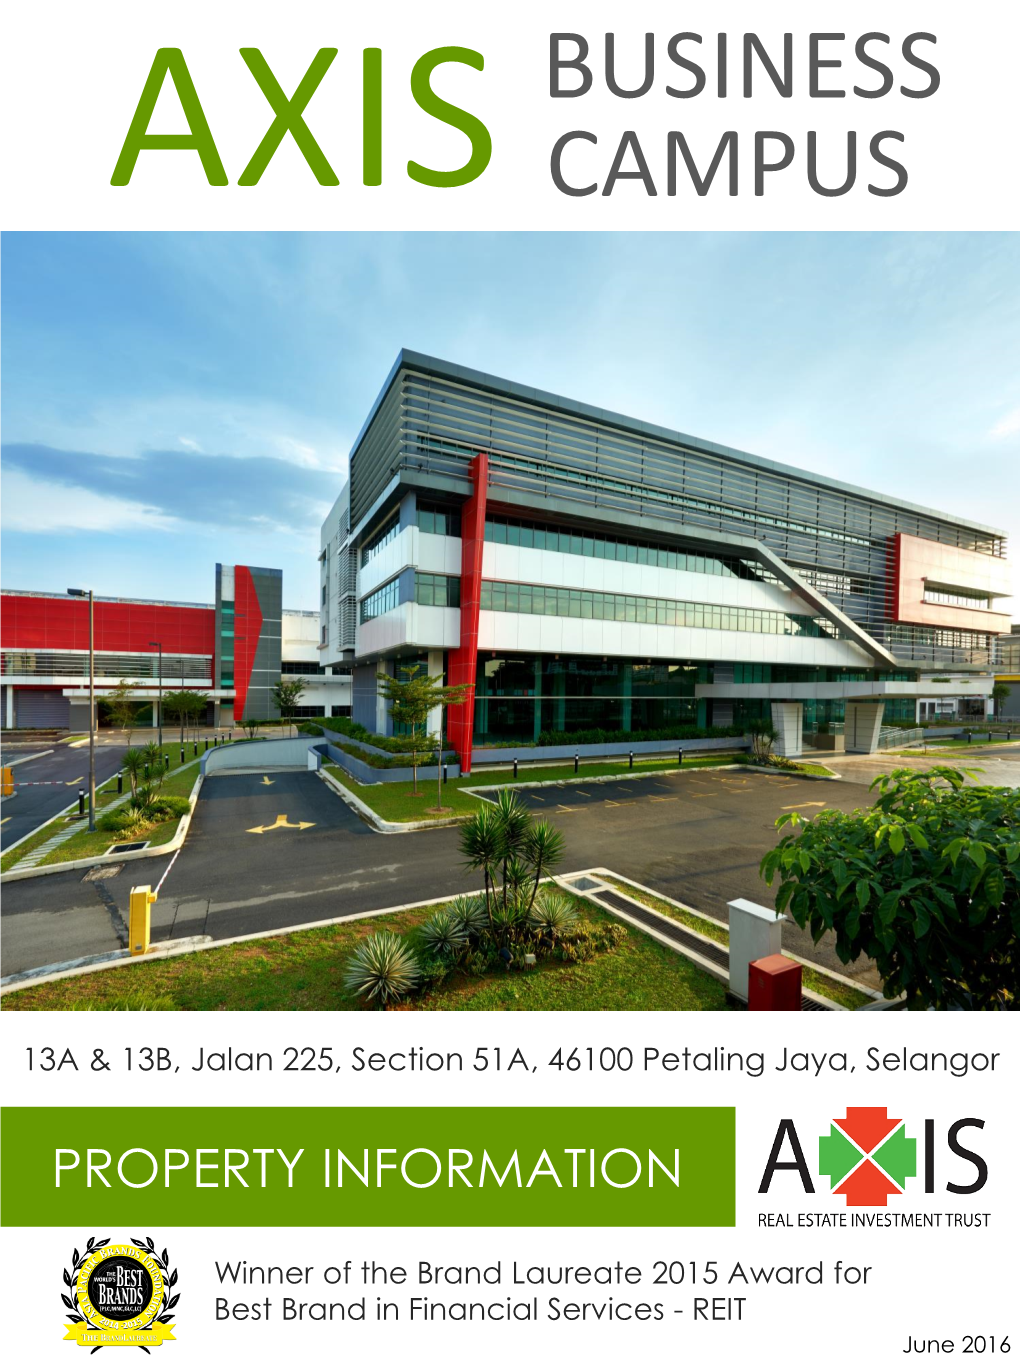 Axis Business Campus